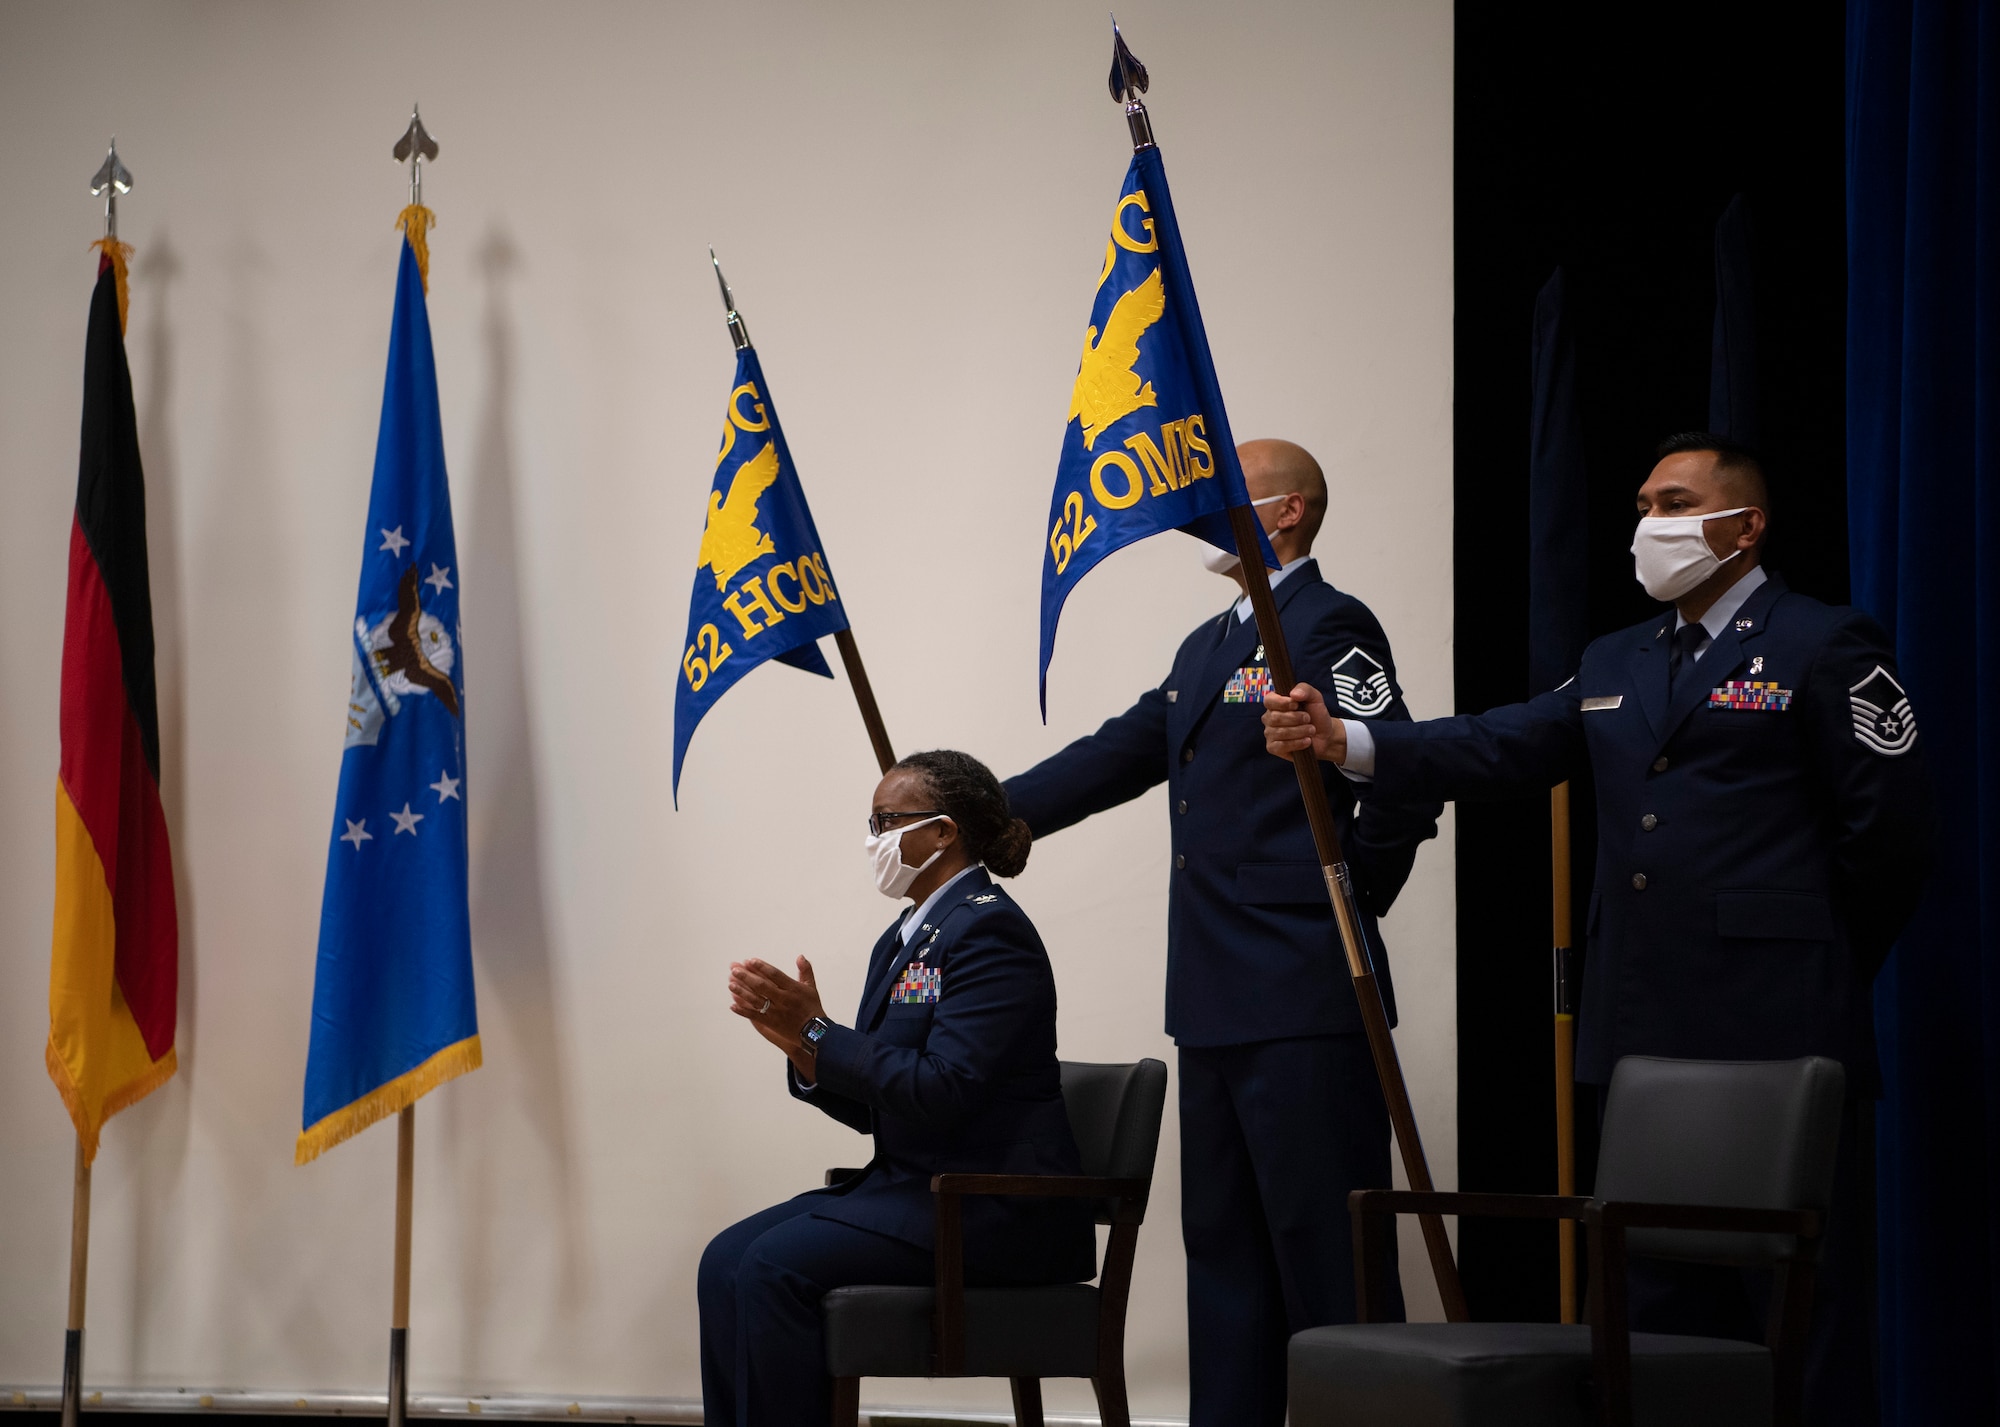 The ceremony re-designated the 52nd Aerospace Medicine Squadron as the 52nd Operational Medical Readiness Squadron, and re-designated the 52nd Medical Operations Squadron as the 52nd Health Care Operations Squadron